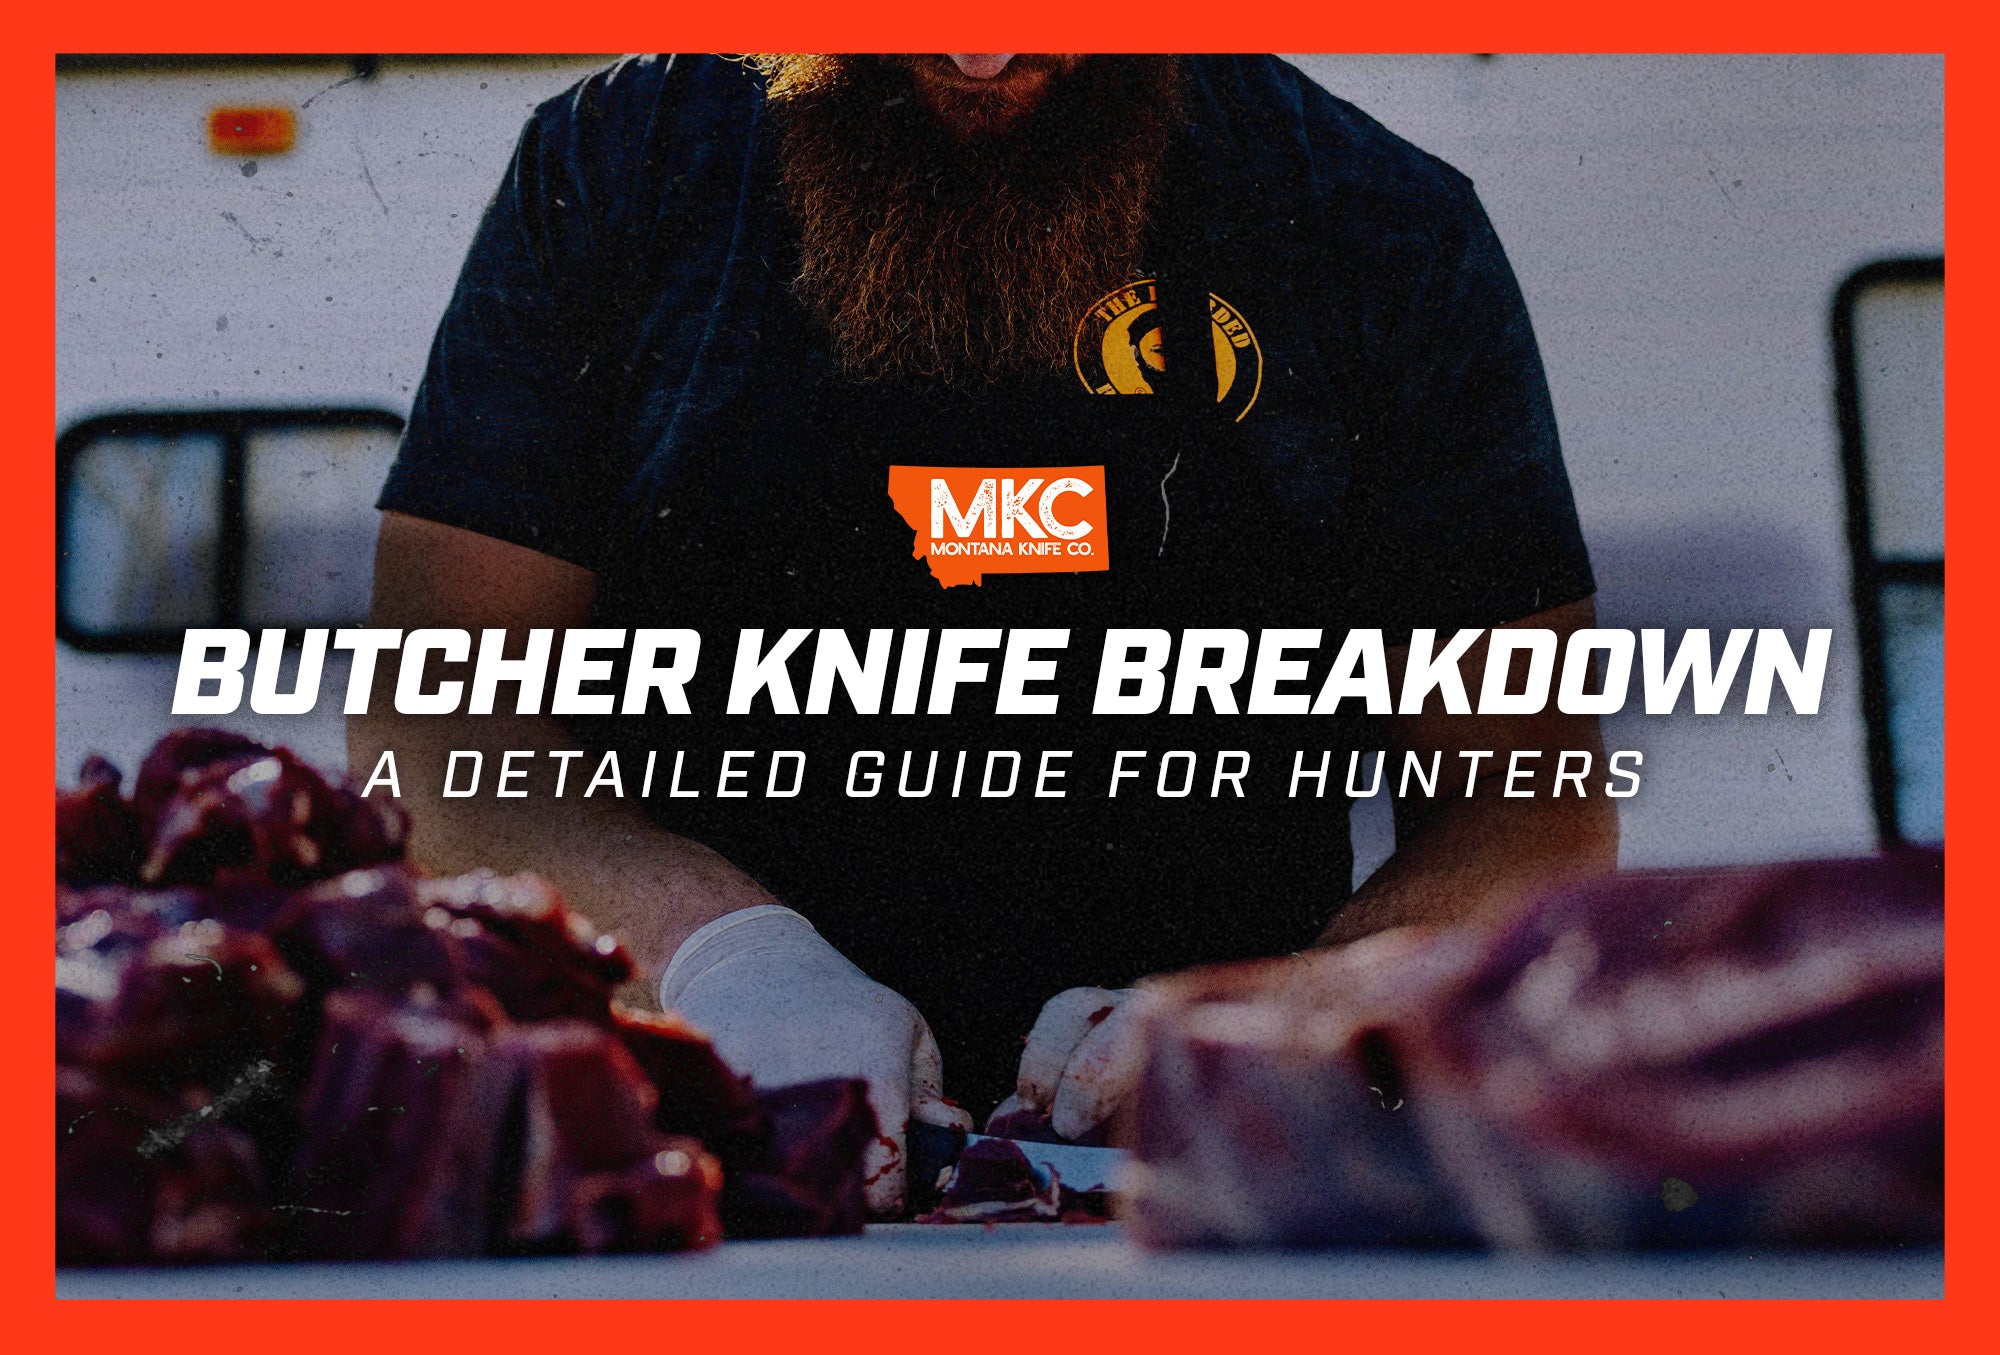 A bearded man wearing gloves and a black apron uses a butcher knife to slice through large cuts of meat on a counter.